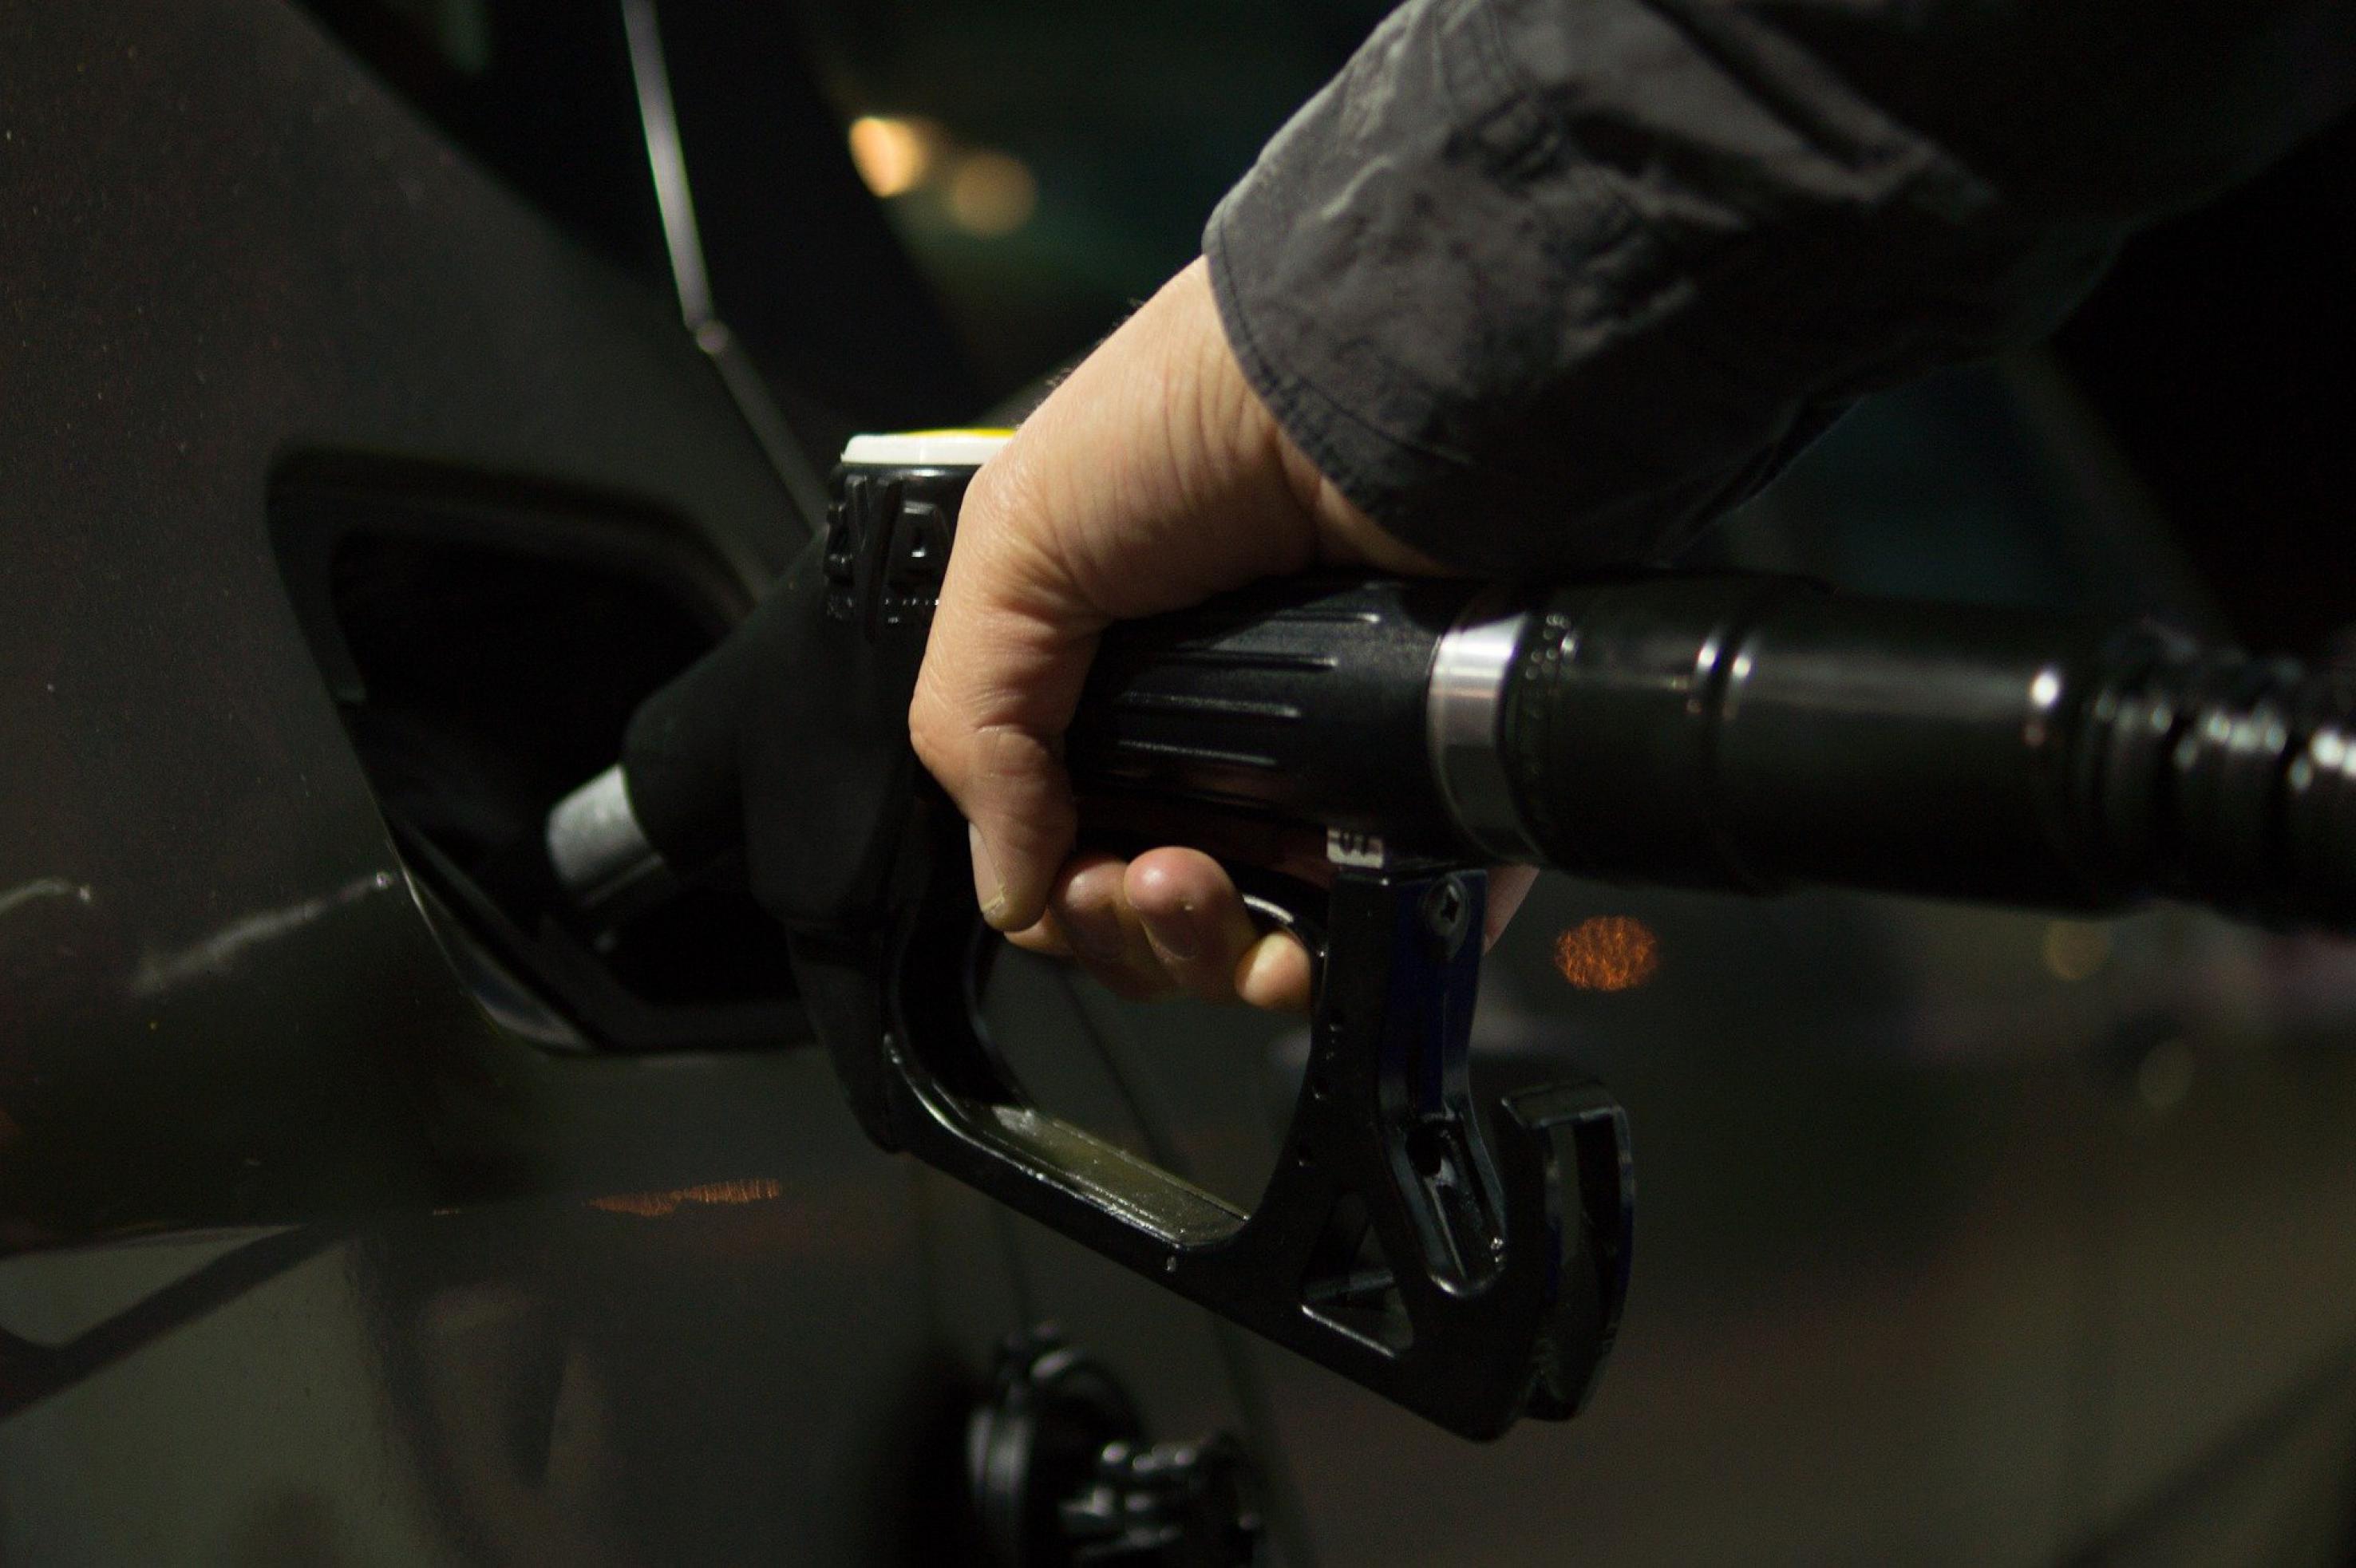 Image of person filling a vehicle with fuel